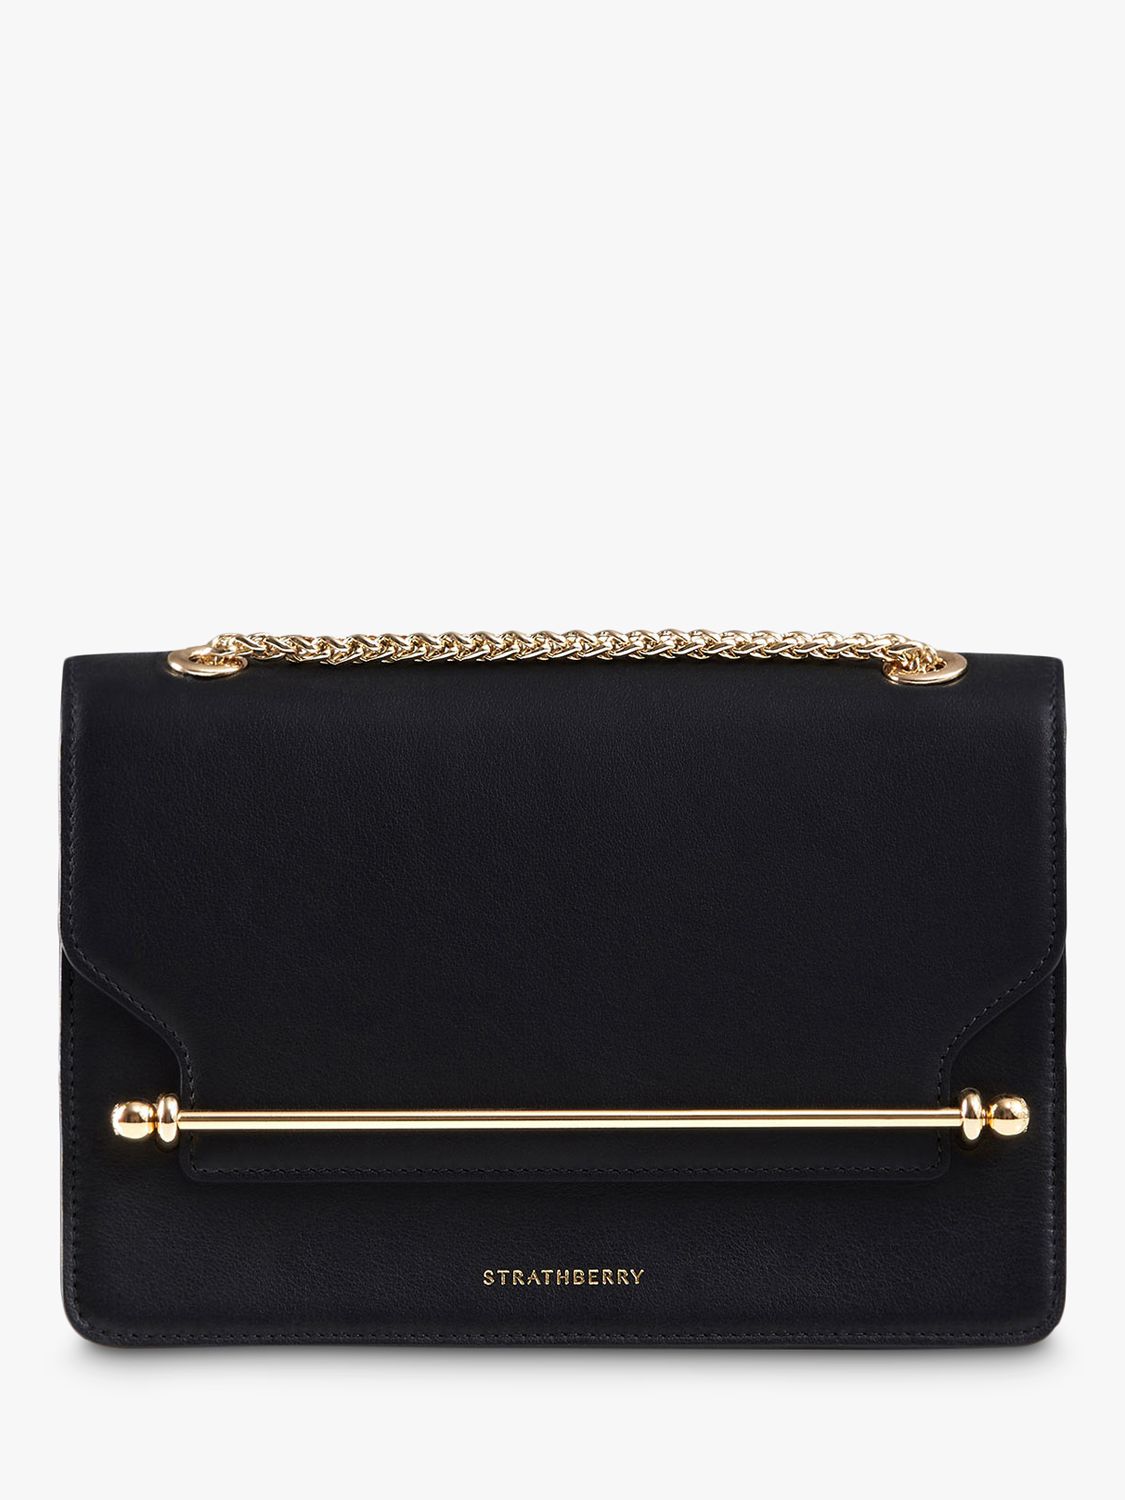 Strathberry East/West Leather Cross Body Bag, Black at John Lewis ...